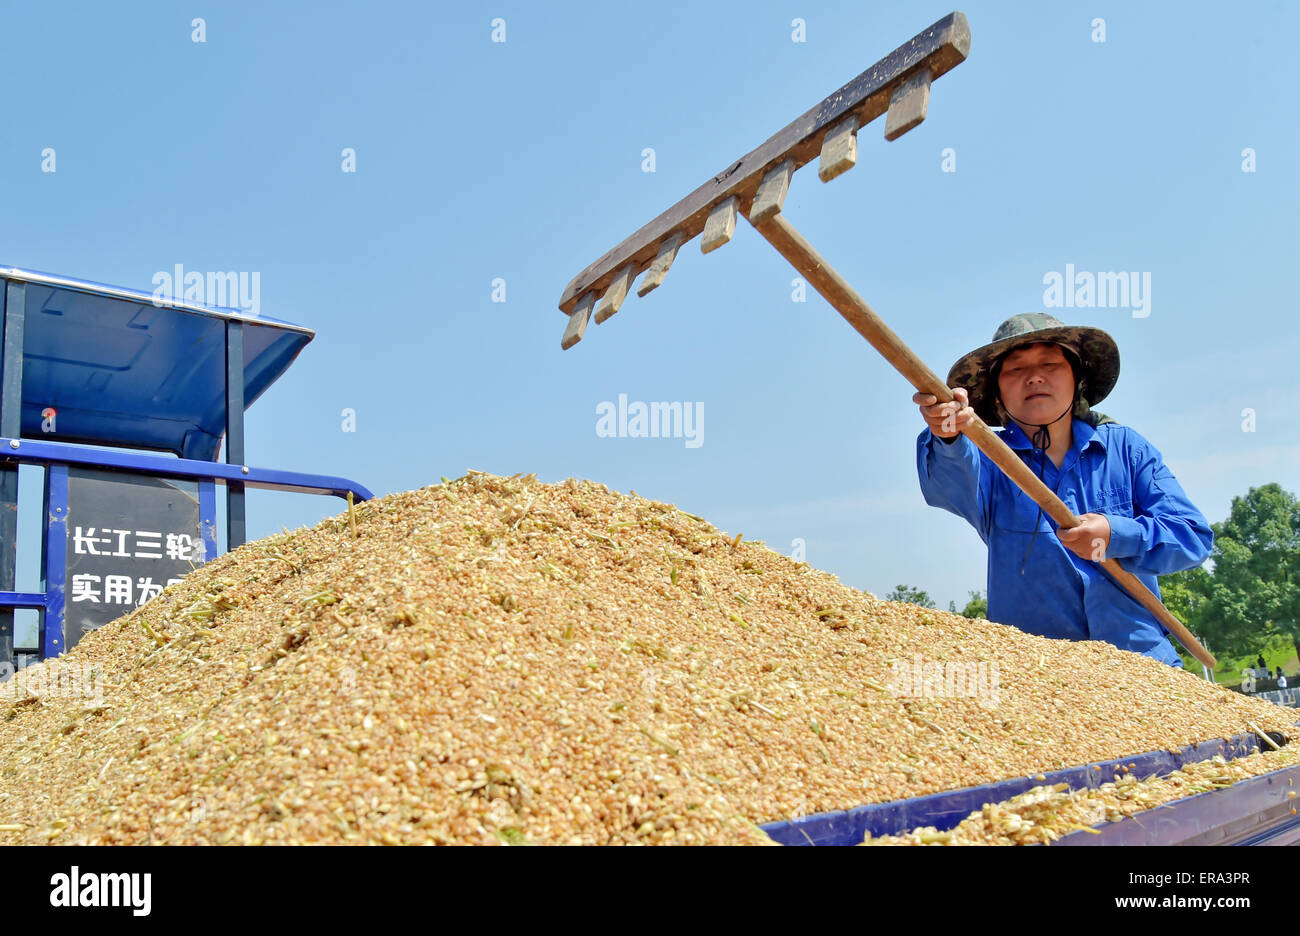 A farmer works in a square to dry the wheats in Xiangyang, Hubei province, China on 24th May 2015. Stock Photo